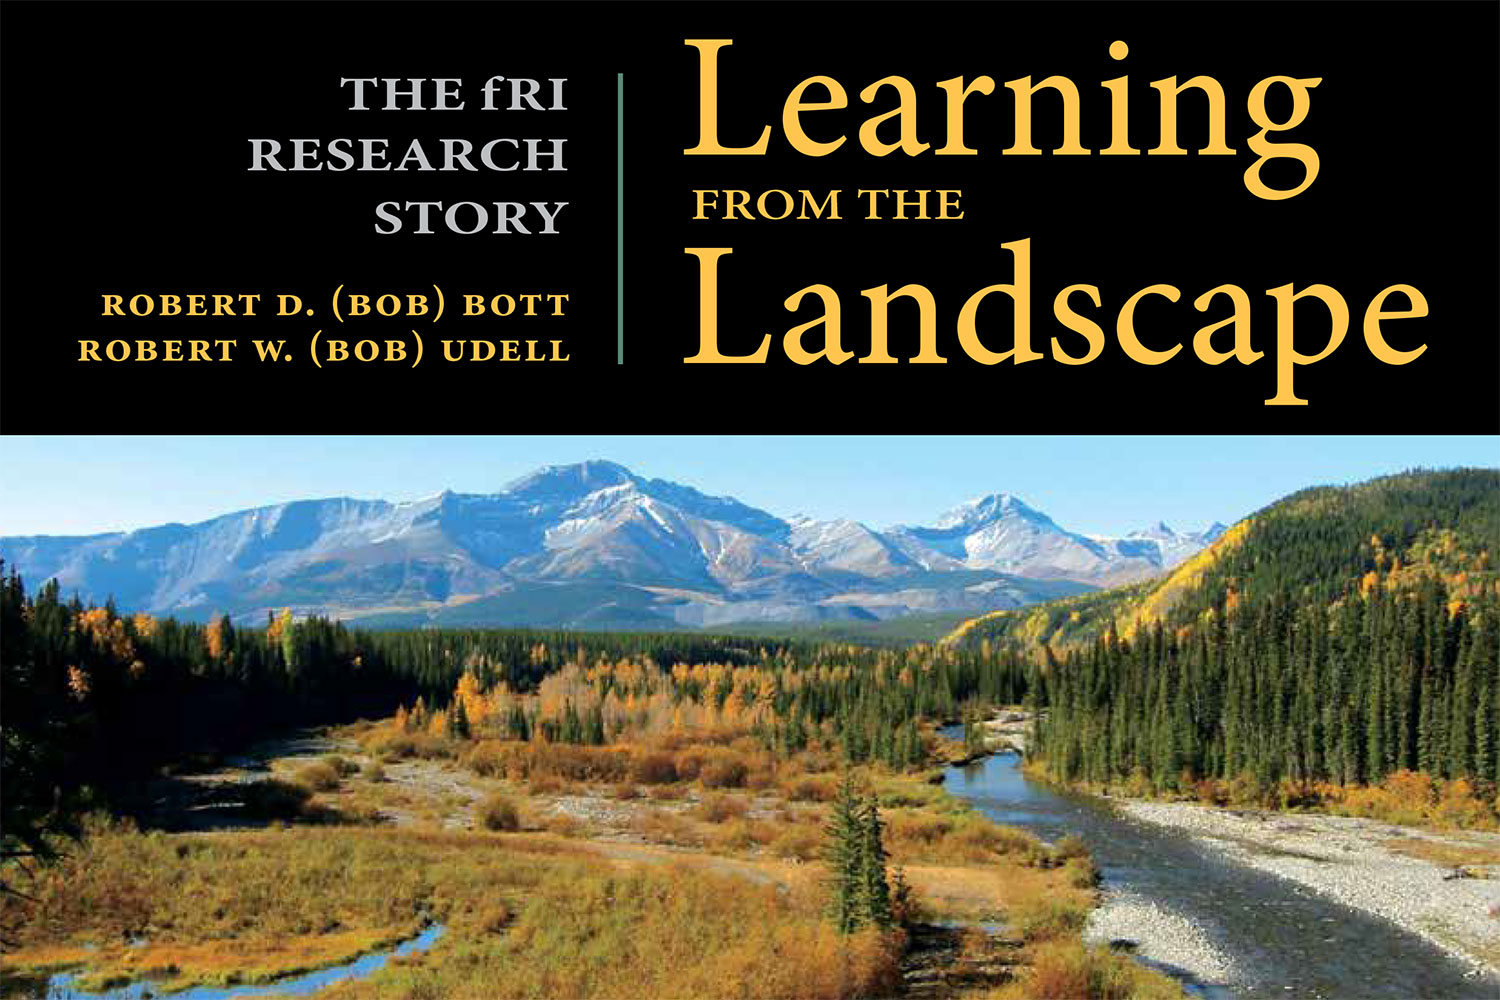 Learning from the Landscape: the fRI Research story